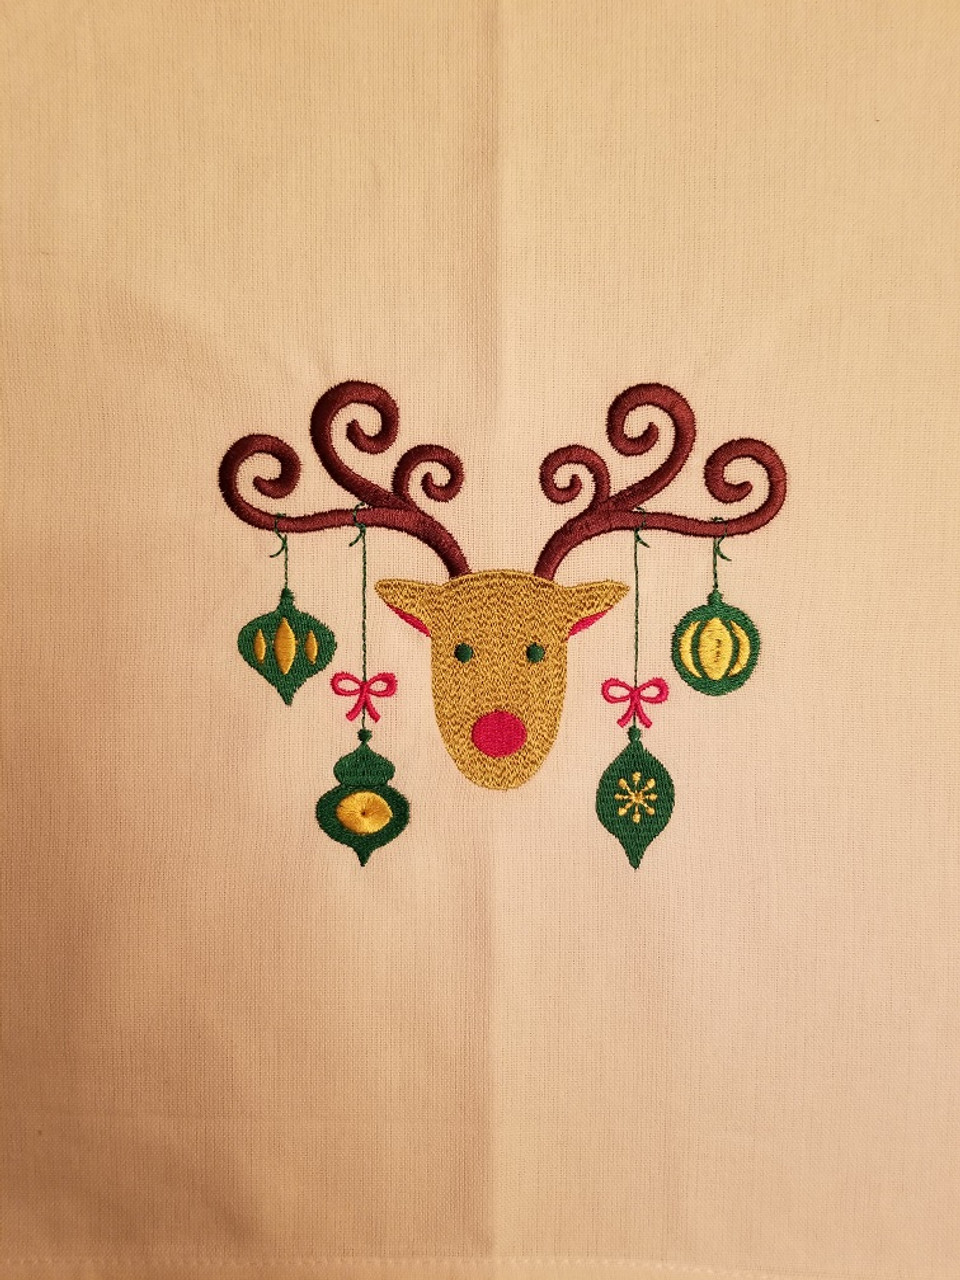 Ornament Reindeer 2 - Kitchen Towel - 20" x 28"
Embroidery on a white towel.
100% Cotton with loop, for optional hanging.
Machine washable in cool water and tumble dry at low temperature.
Minimal shrinkage.
Size: 20" x 28"